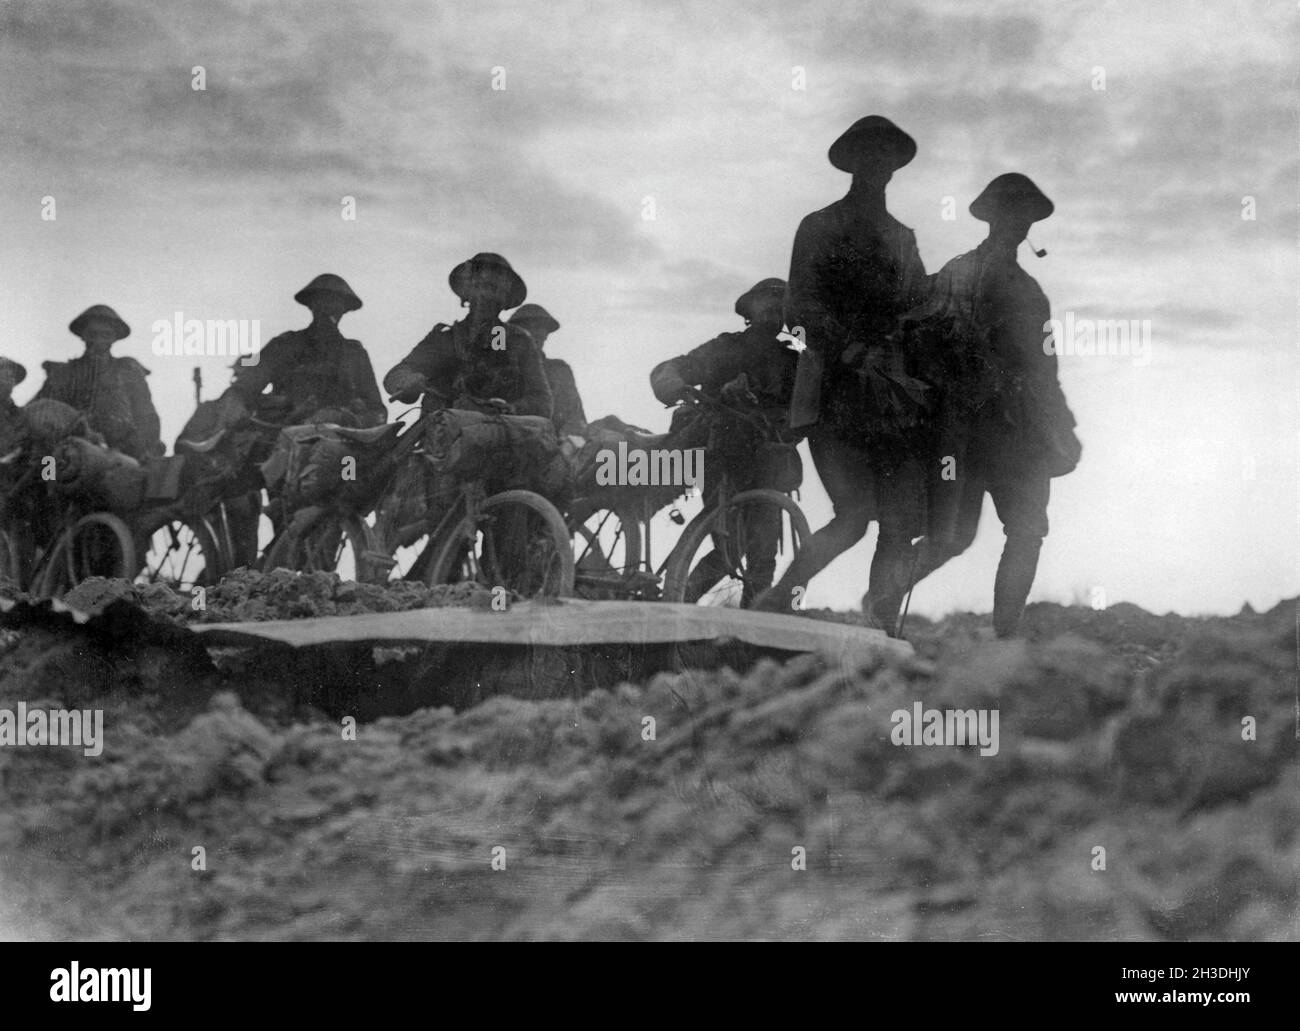 First World War 1914-1918. British soldiers marching in silhouette on the western front. Stock Photo